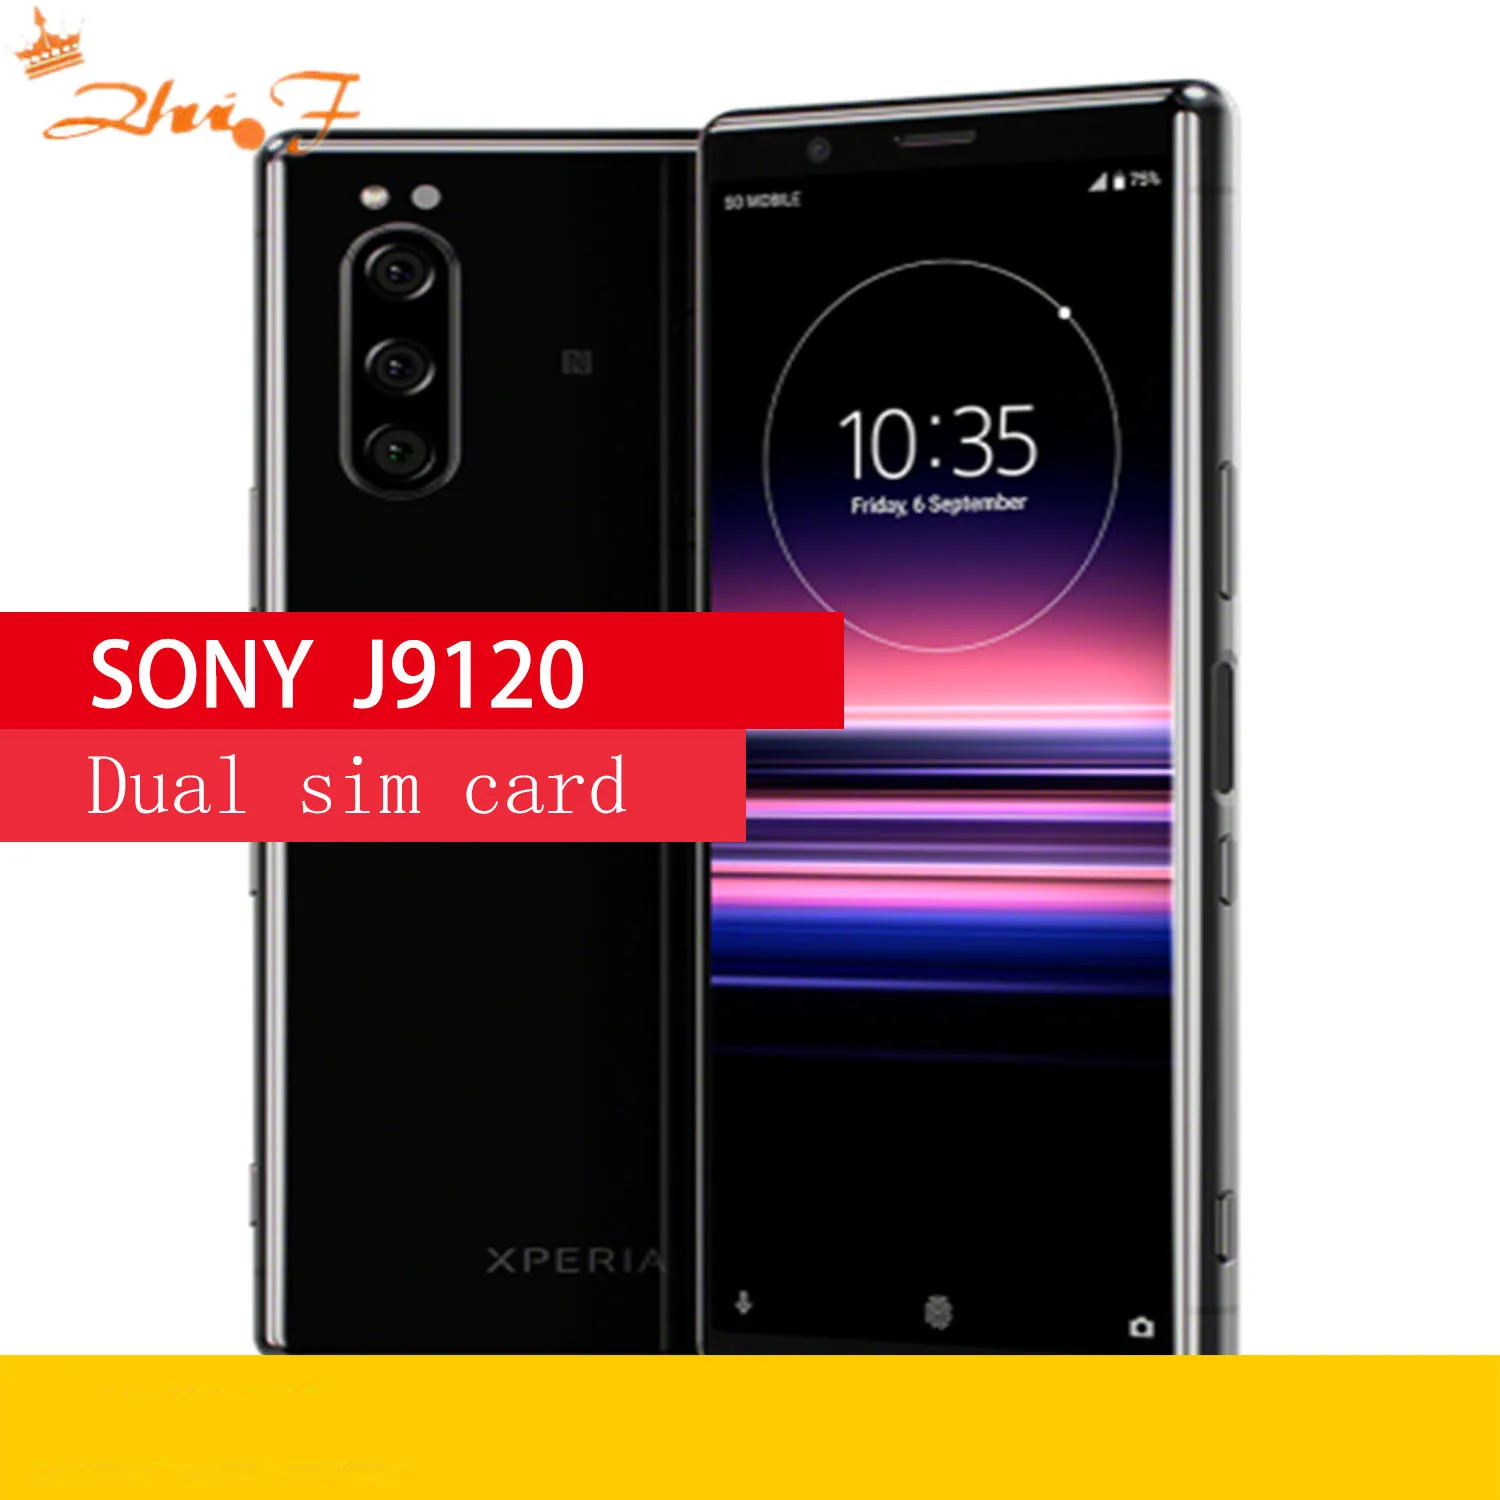 Sony Xperia 5 J9210 Android Cep telefonu 4G LTE 6.1 